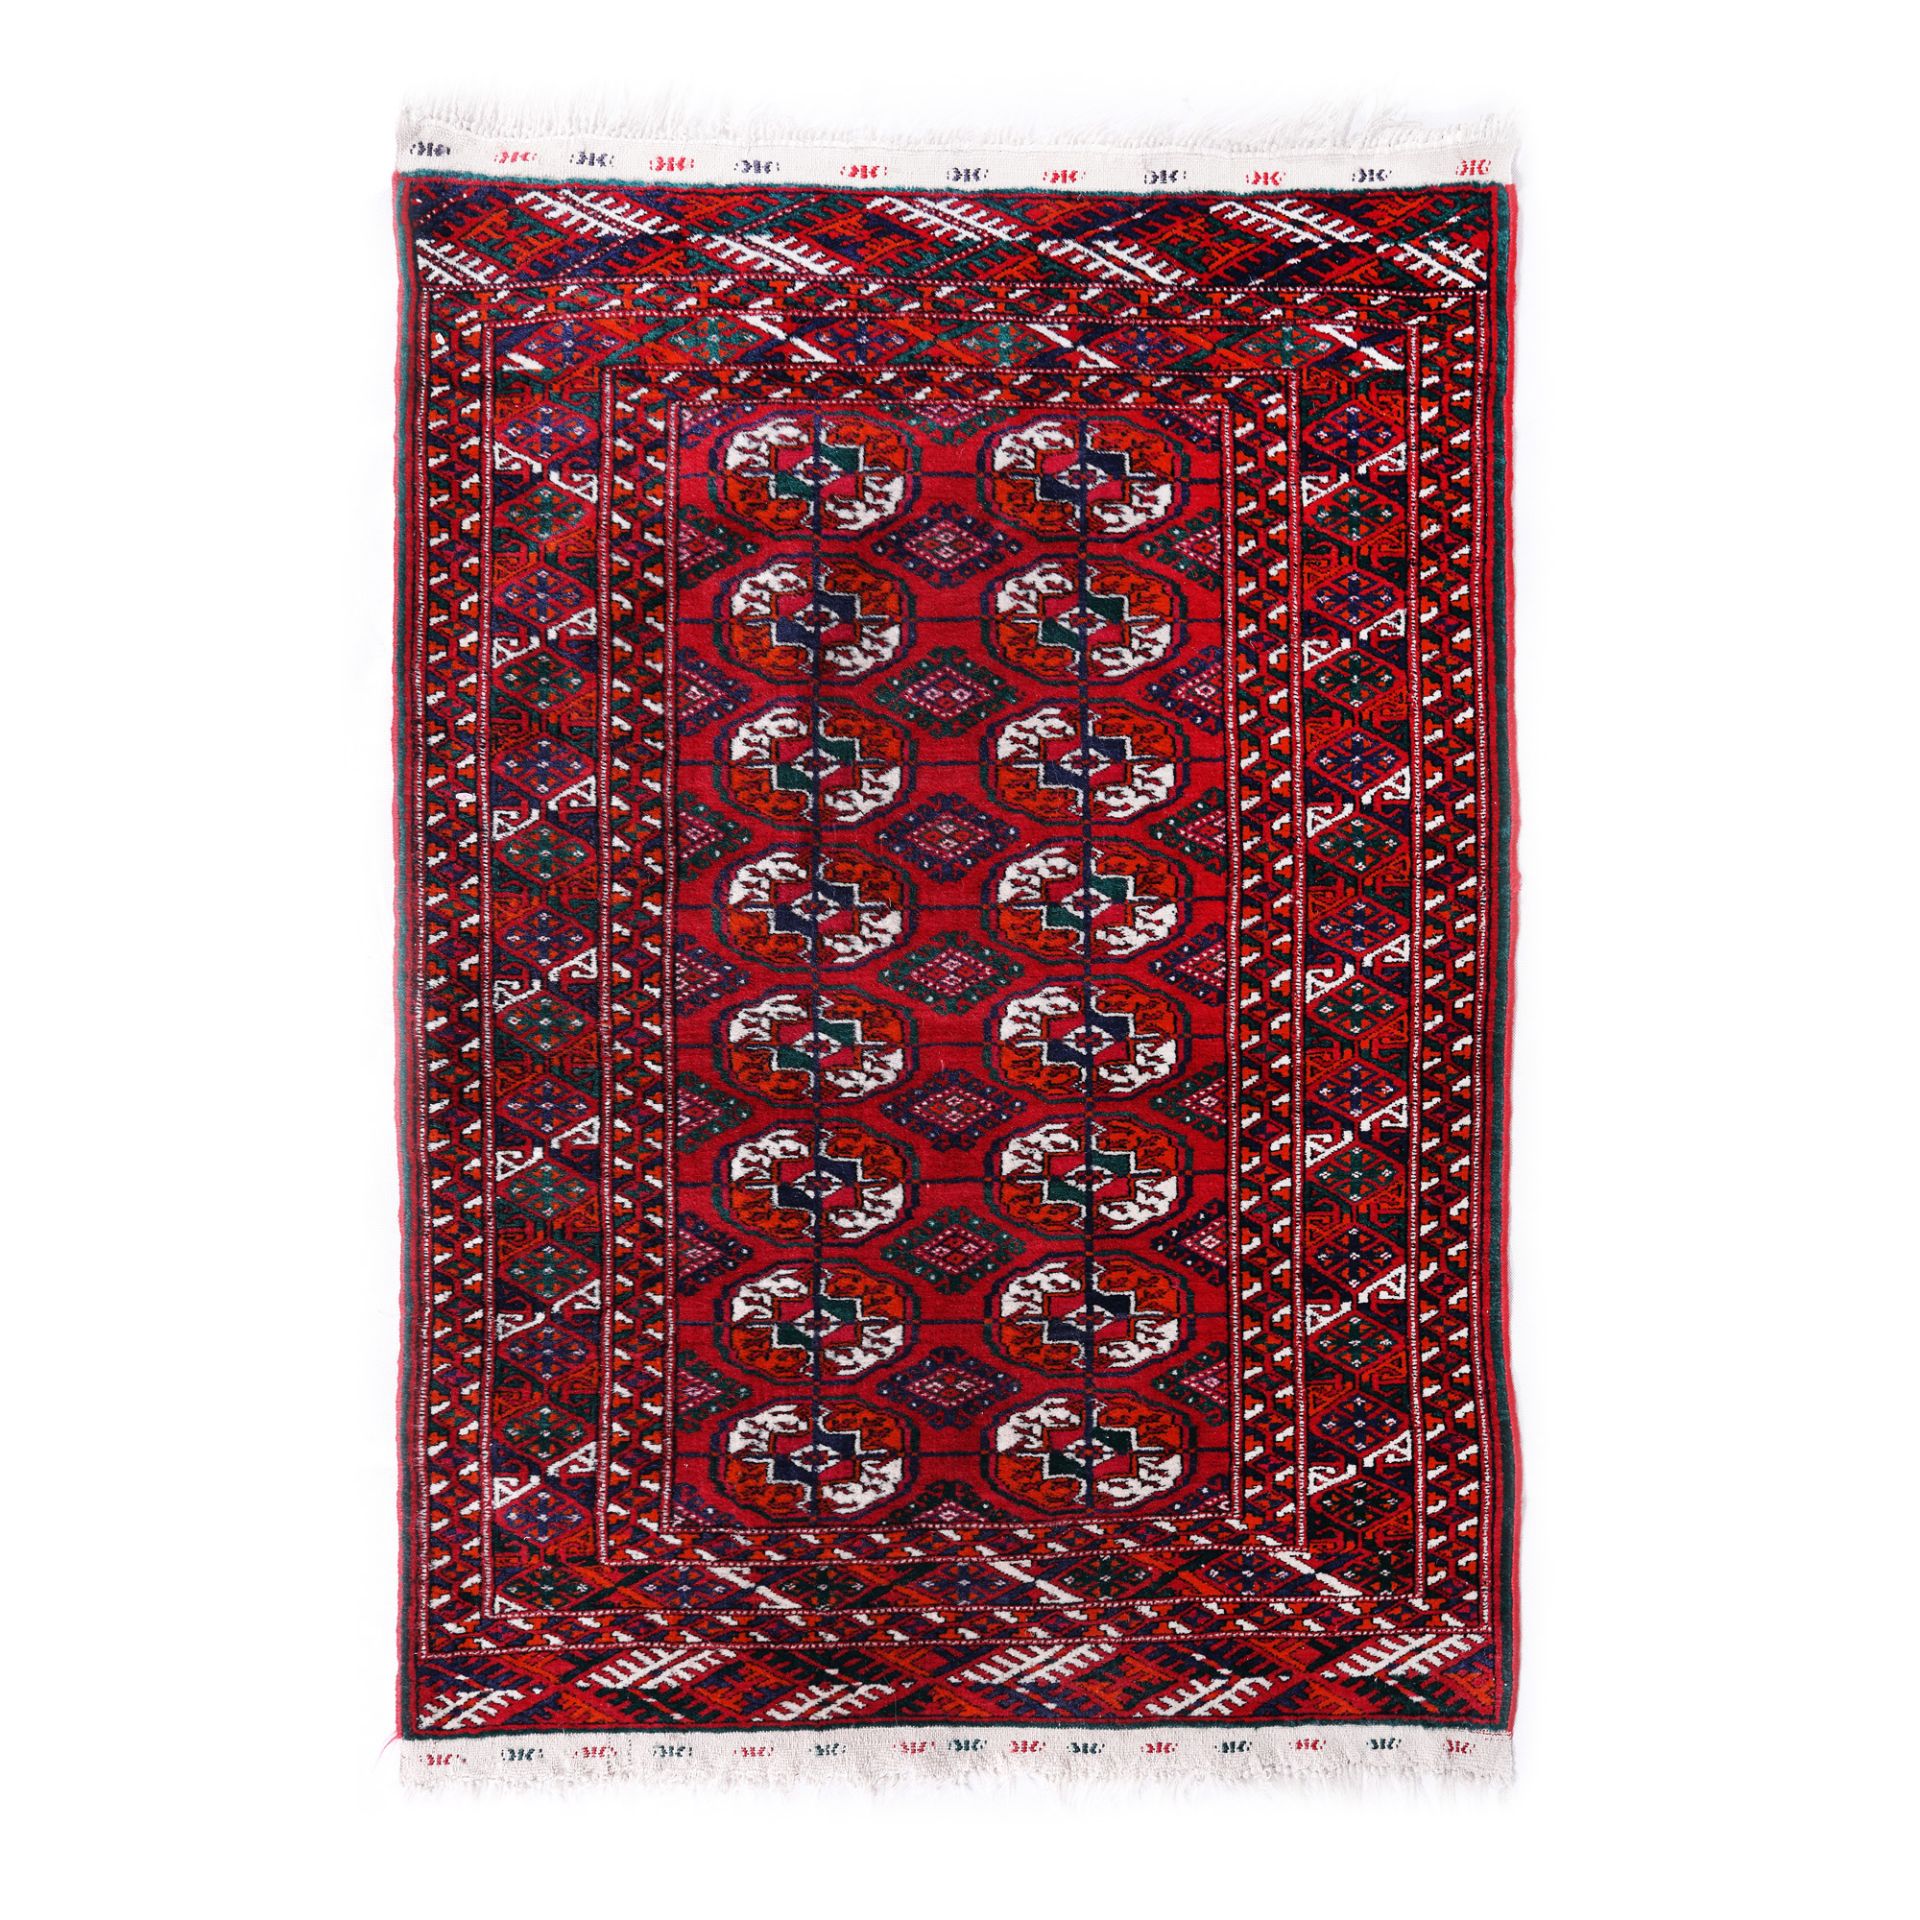 Tekke-Buhara wool rug, decorated with specific motifs, Turkmenistan